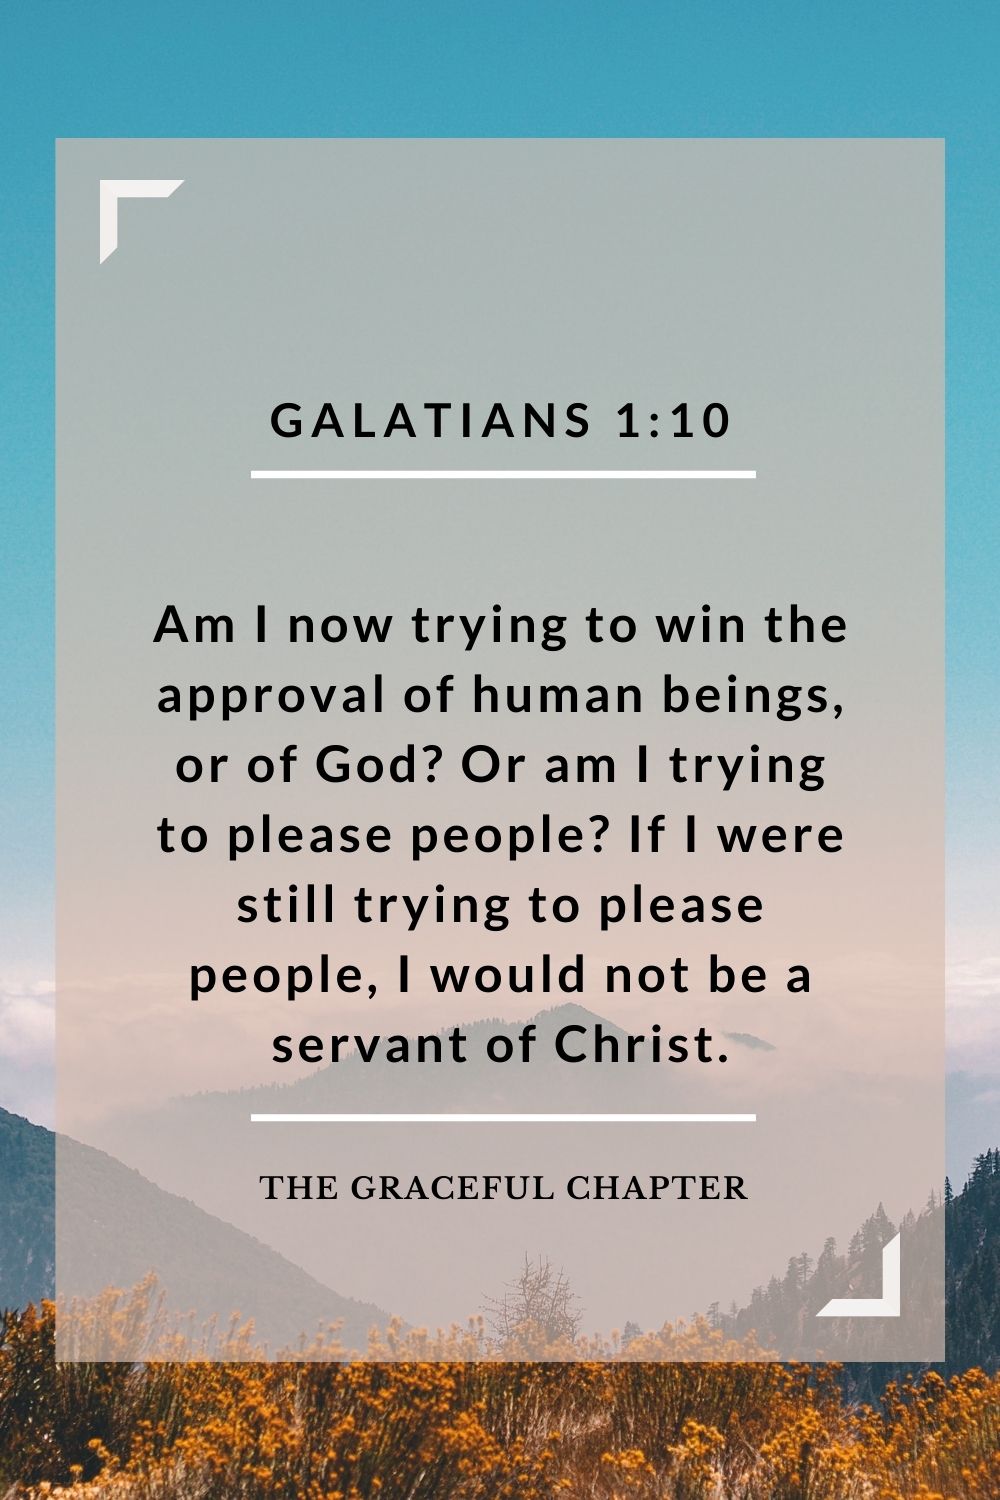 Am I now trying to win the approval of human beings, or of God? Or am I trying to please people? If I were still trying to please people, I would not be a servant of Christ. Galatians 1:10